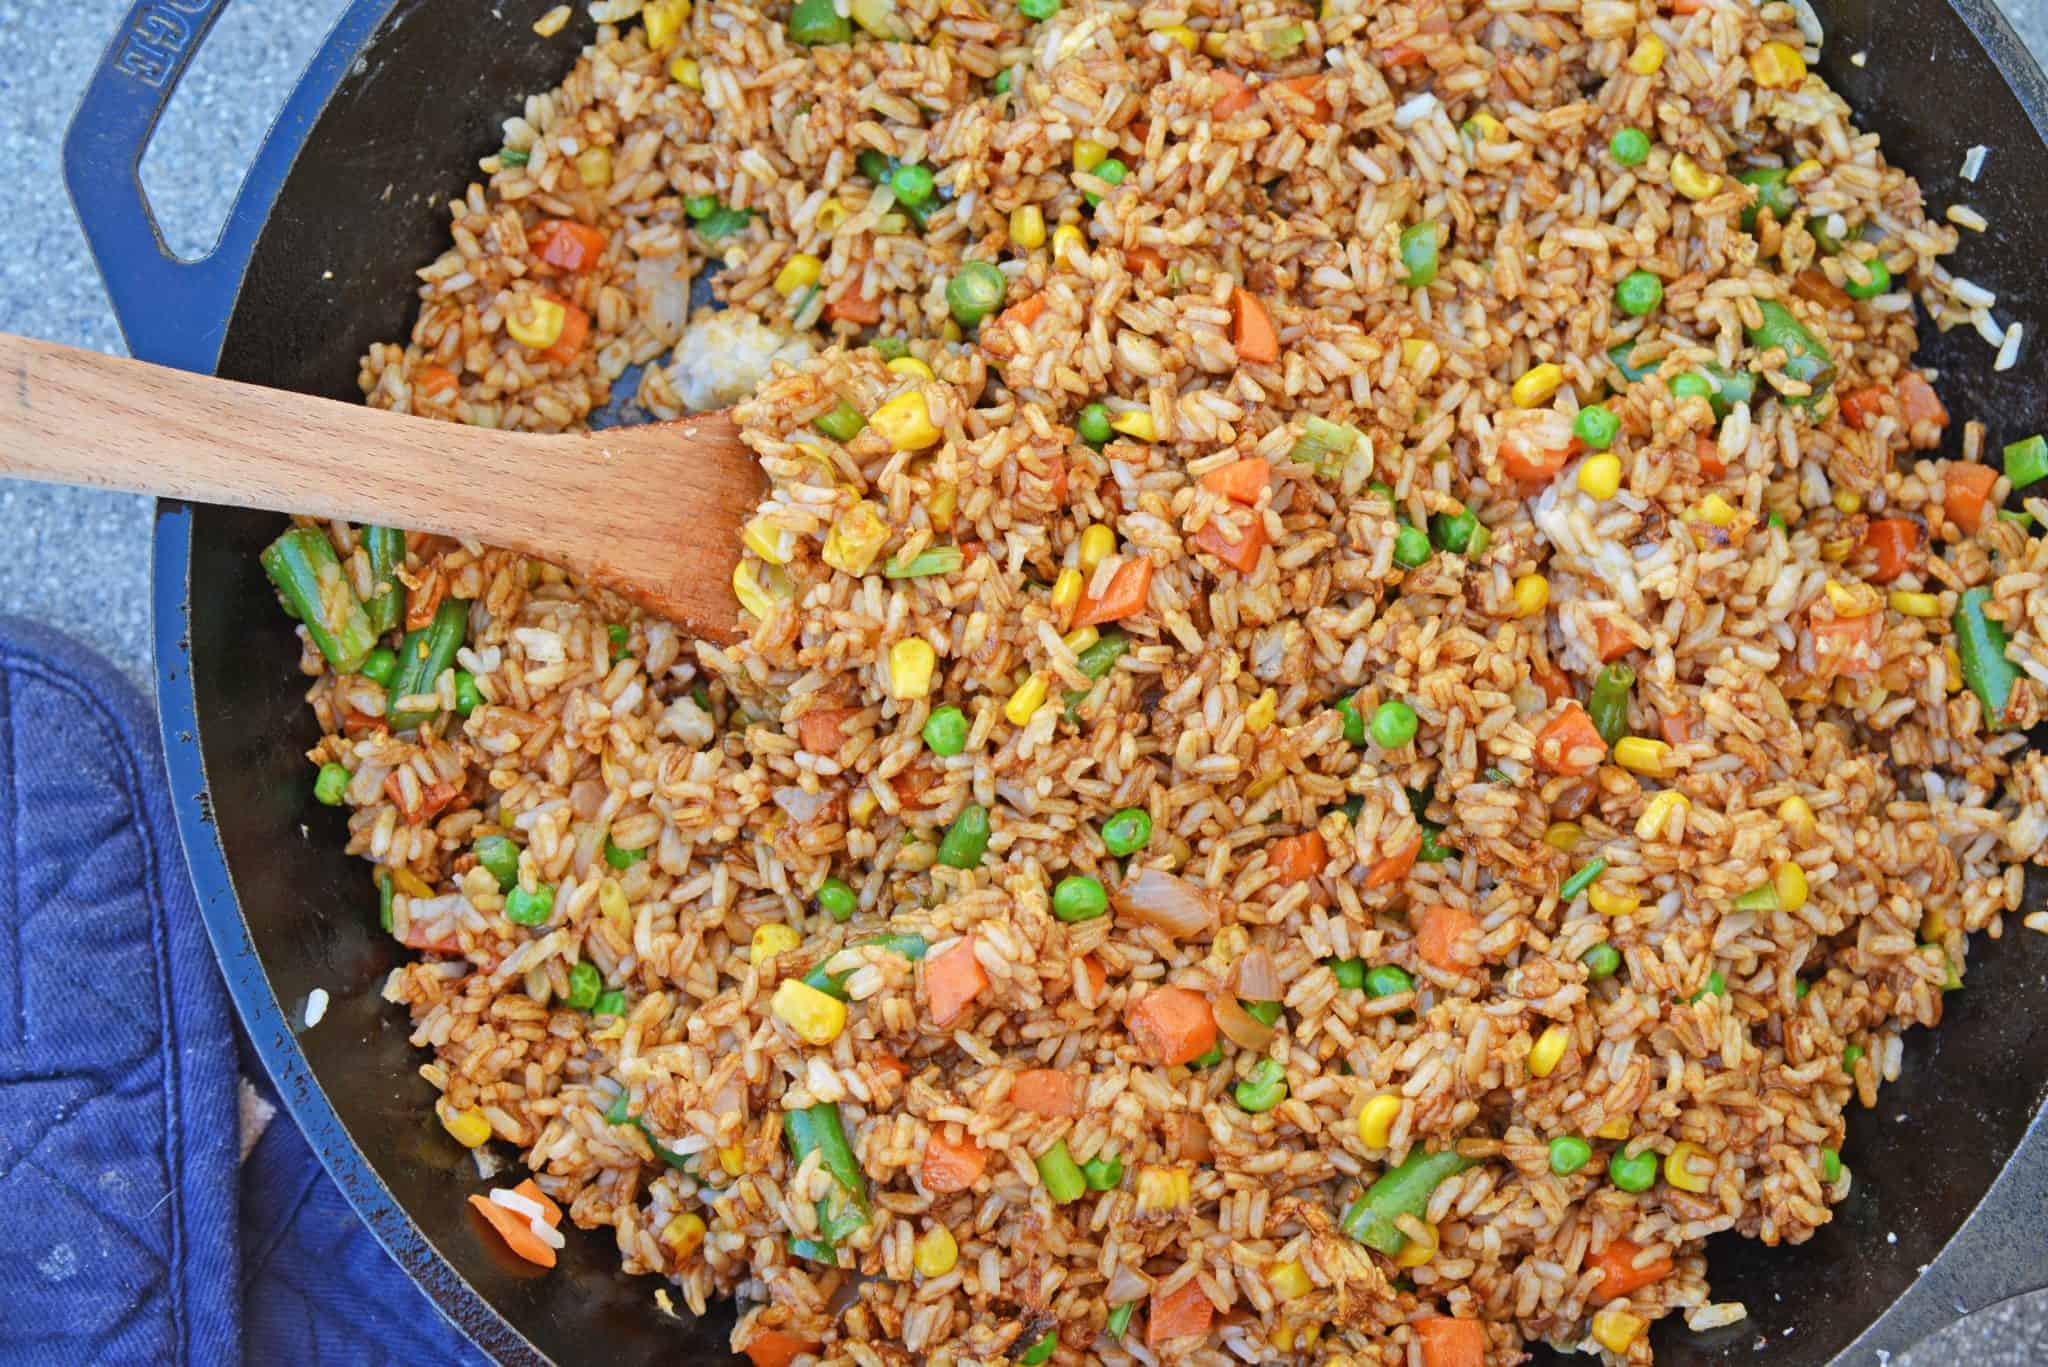 Easy Fried Rice + Video - Restaurant Style Fried Rice in Minutes!